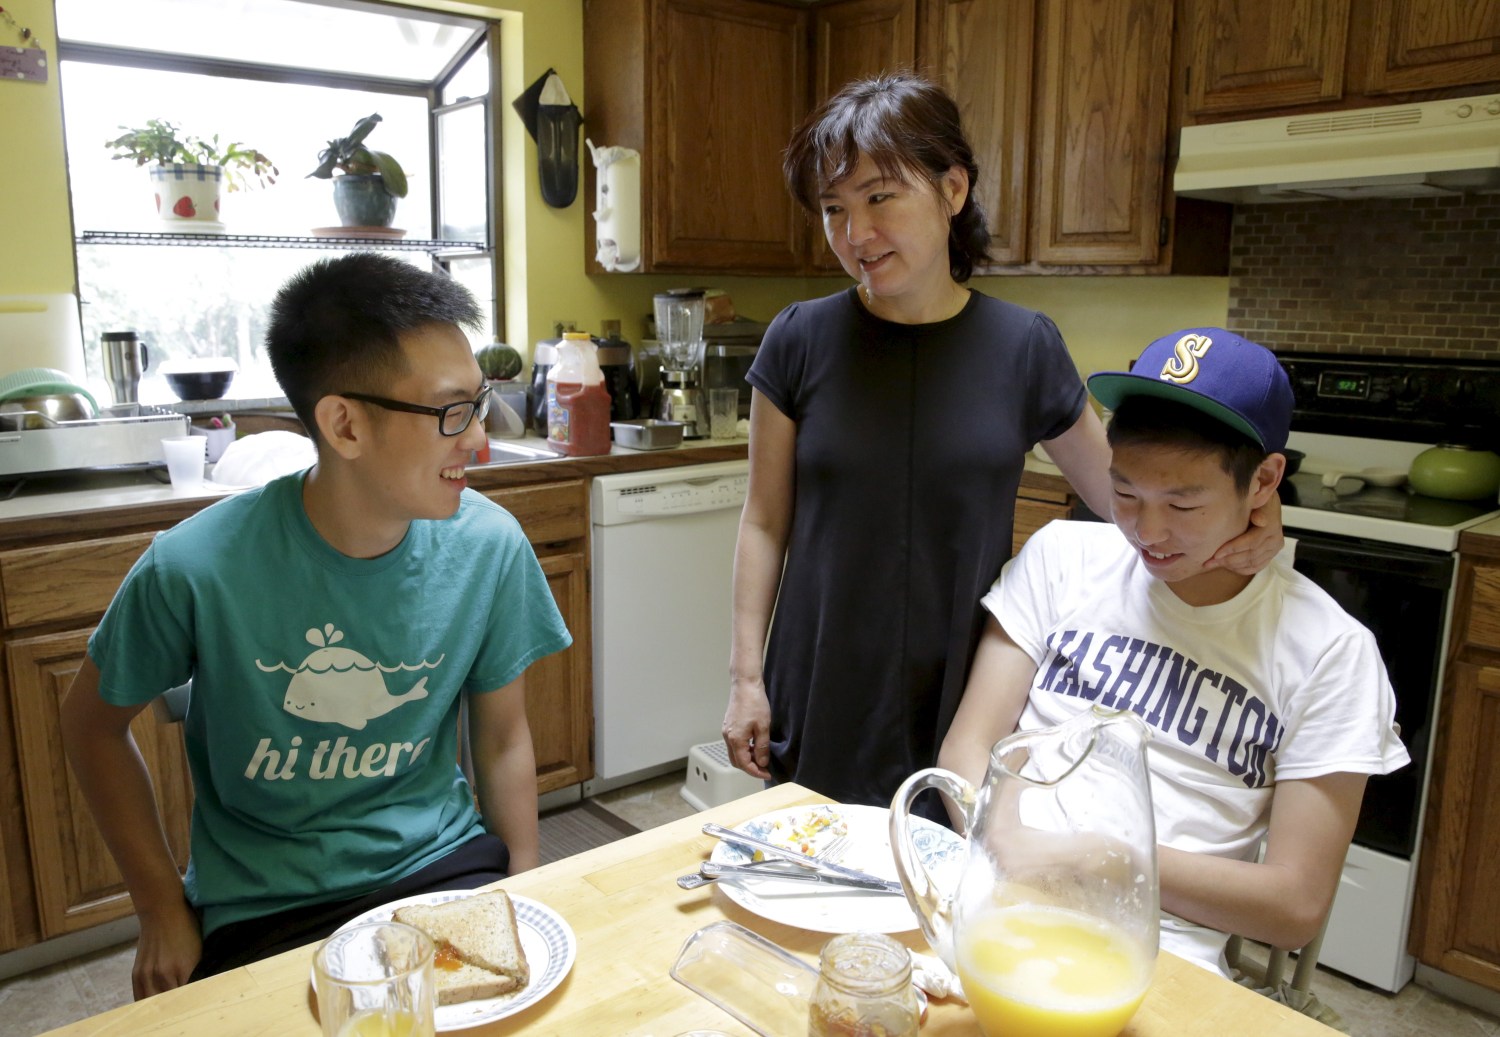 Un Bang (C) spends time with her sons, Shane Bang (L), 21, and Simon Bang (R), 18, at their home in Federal Way, Washington August 8, 2015. With his parents out of work and an office job paying his bills, college junior Shane remembers the anxiety he felt when his younger brother told his family he was headed to University of Washington in the fall. Then they got an unexpected lifeline. A law that took effect last month slashed tuition at public colleges and universities over the next two academic years as much as 20 percent for all Washington students, rich and poor alike. Picture taken August 8, 2015. To match Feature USA-EDUCATION/WASHINGTON      REUTERS/Jason Redmond - GF20000019465